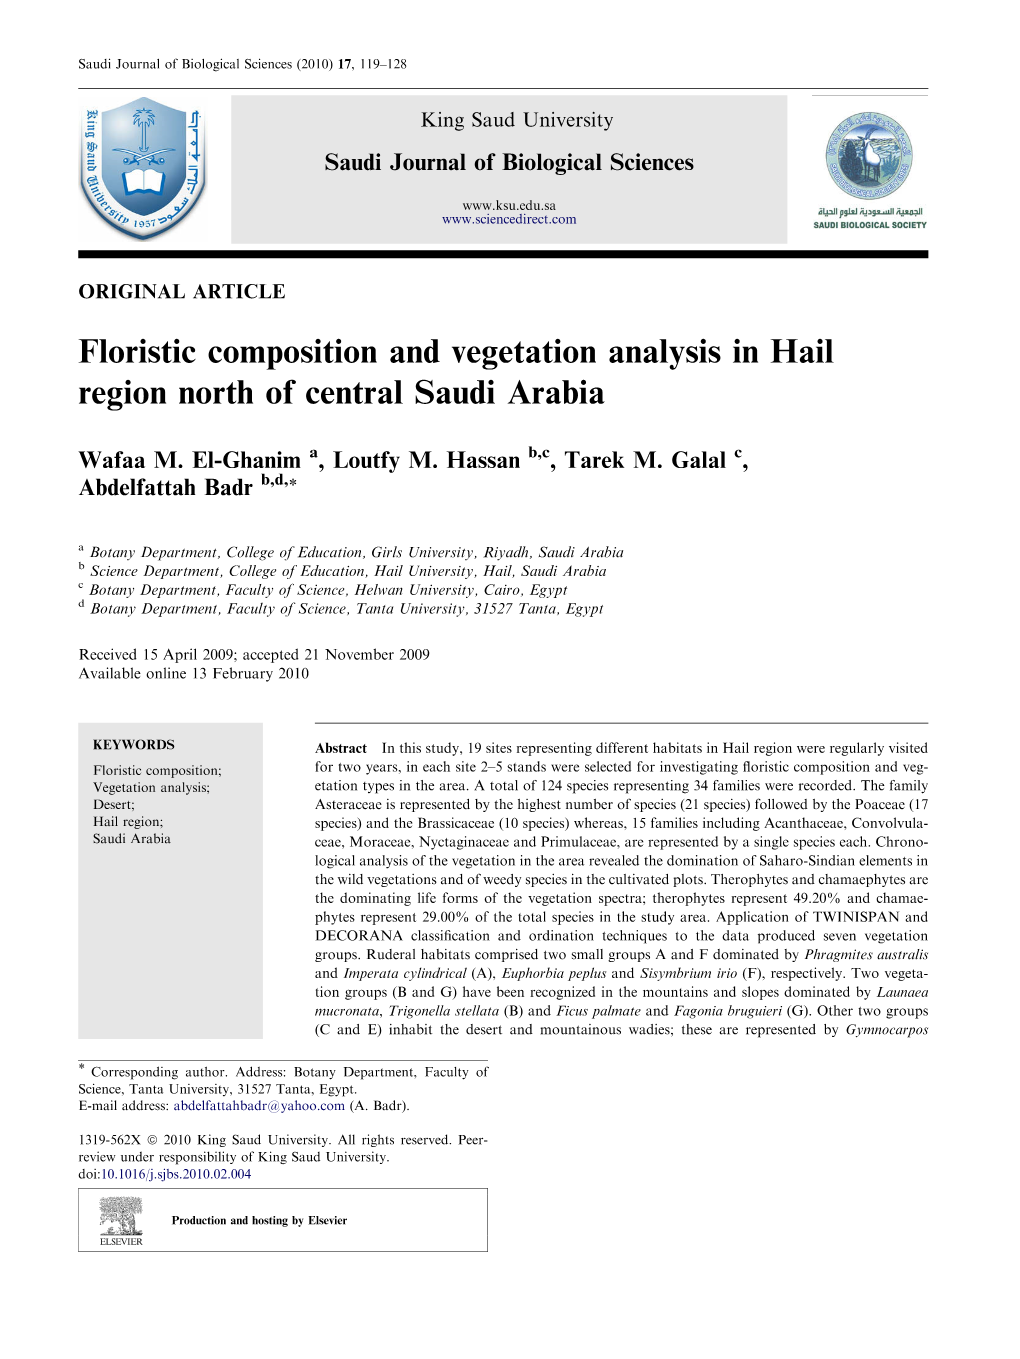 Floristic Composition and Vegetation Analysis in Hail Region North of Central Saudi Arabia